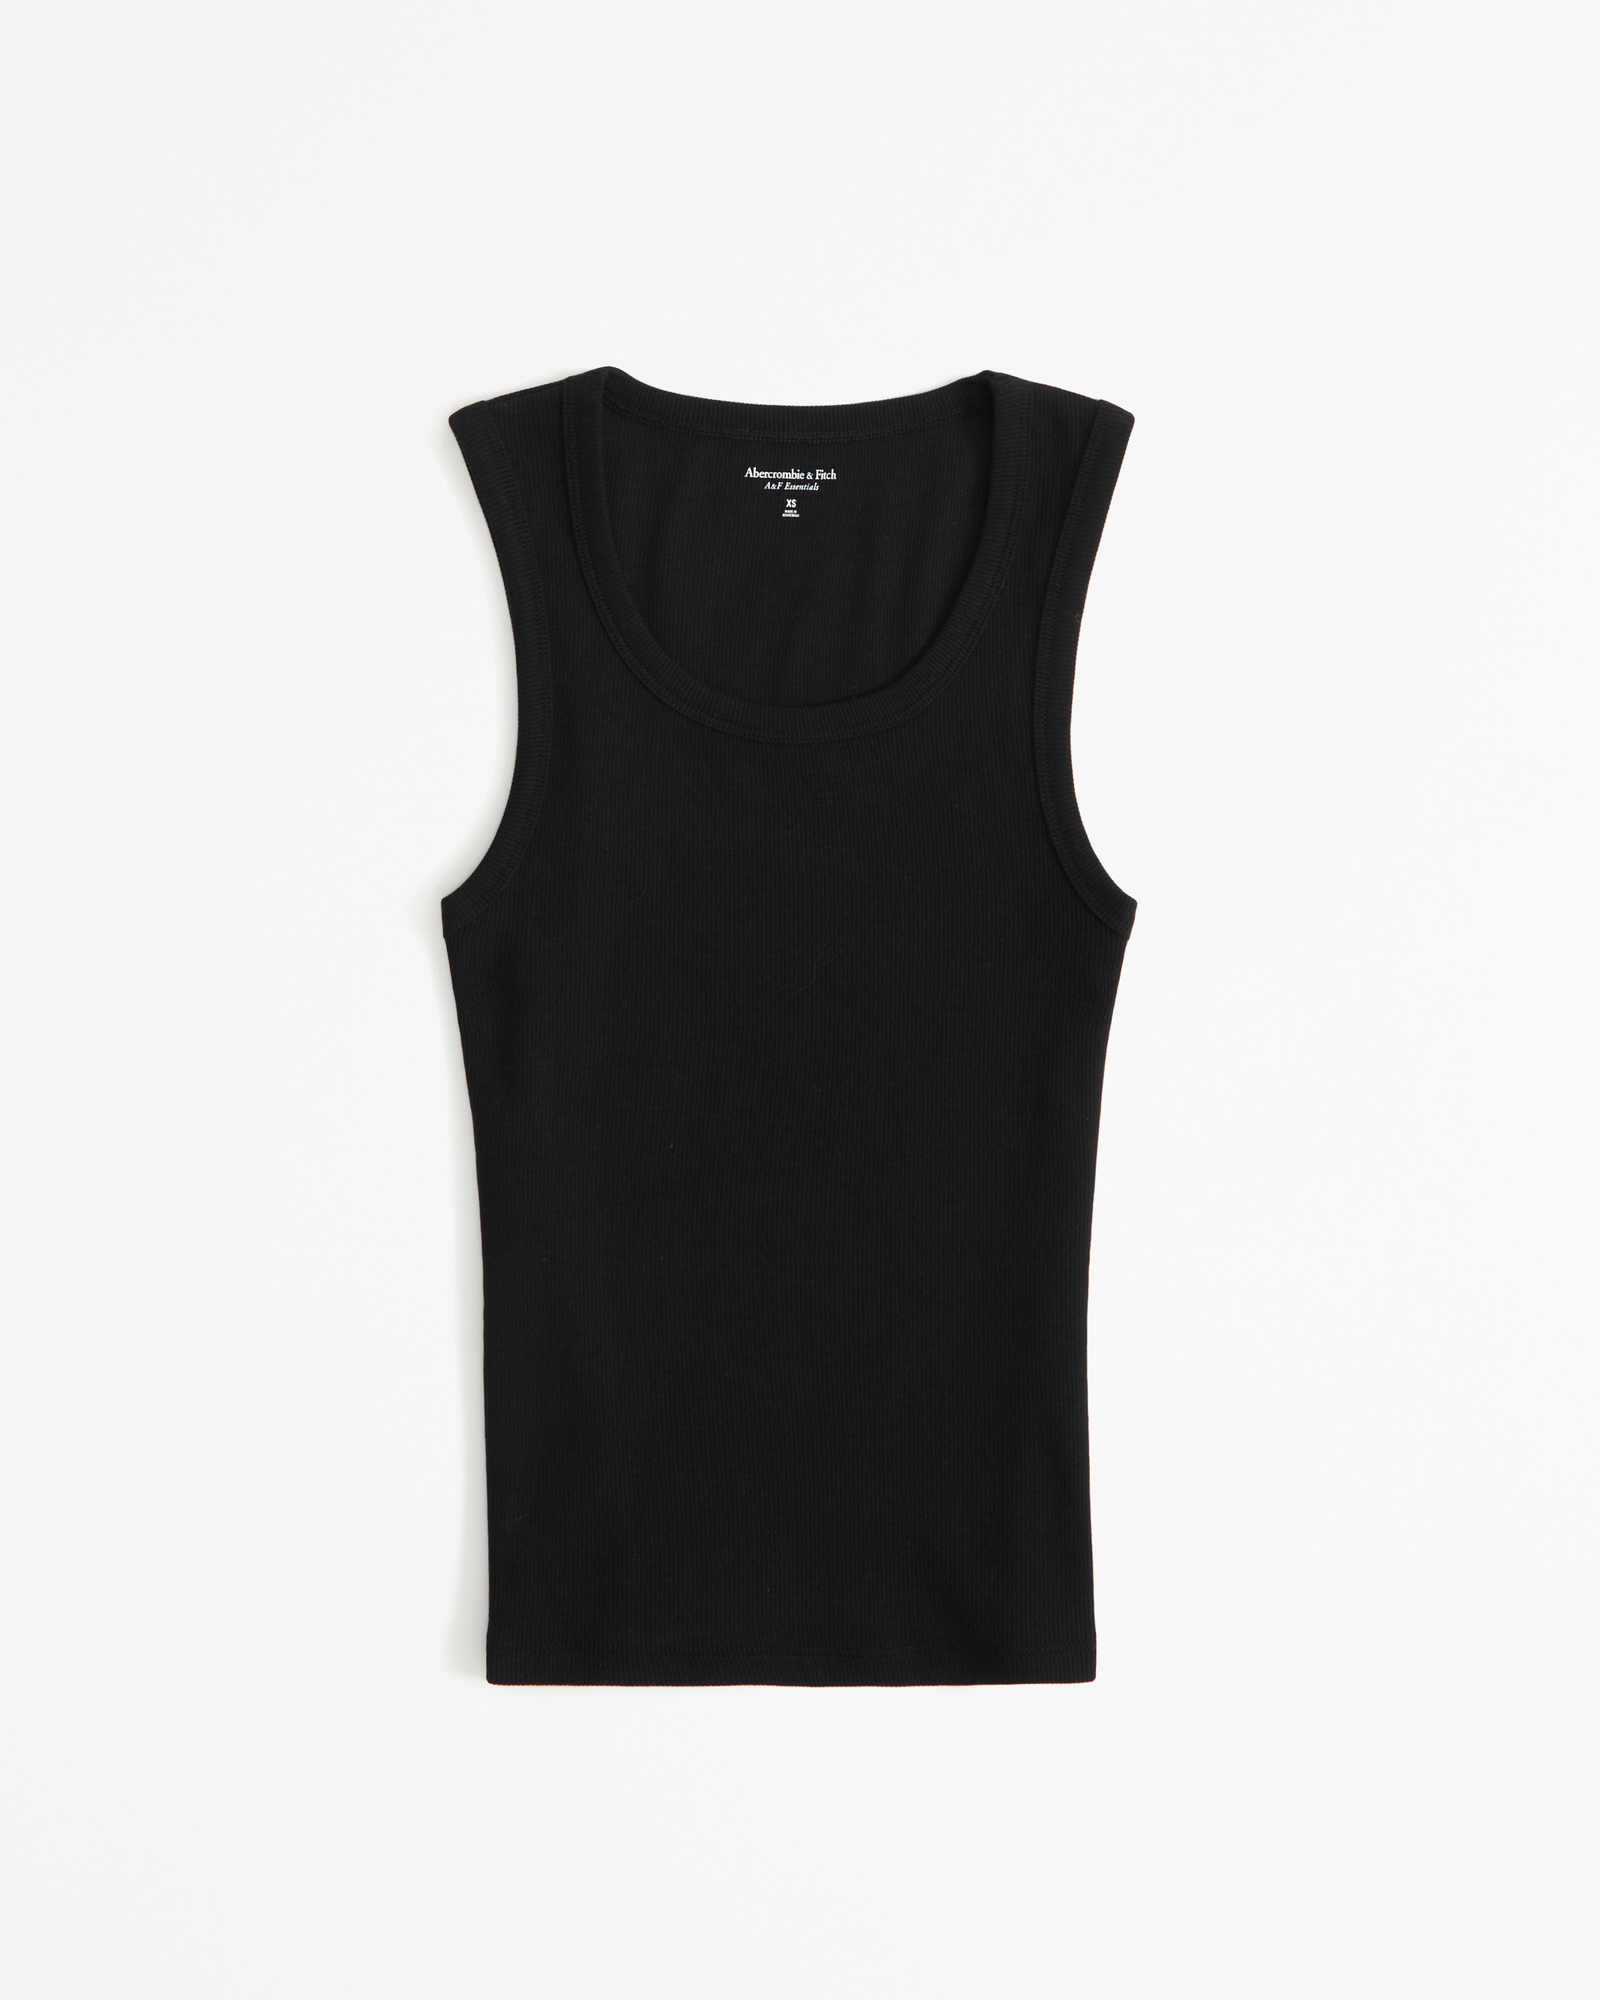 Abercrombie & Fitch black tank top small